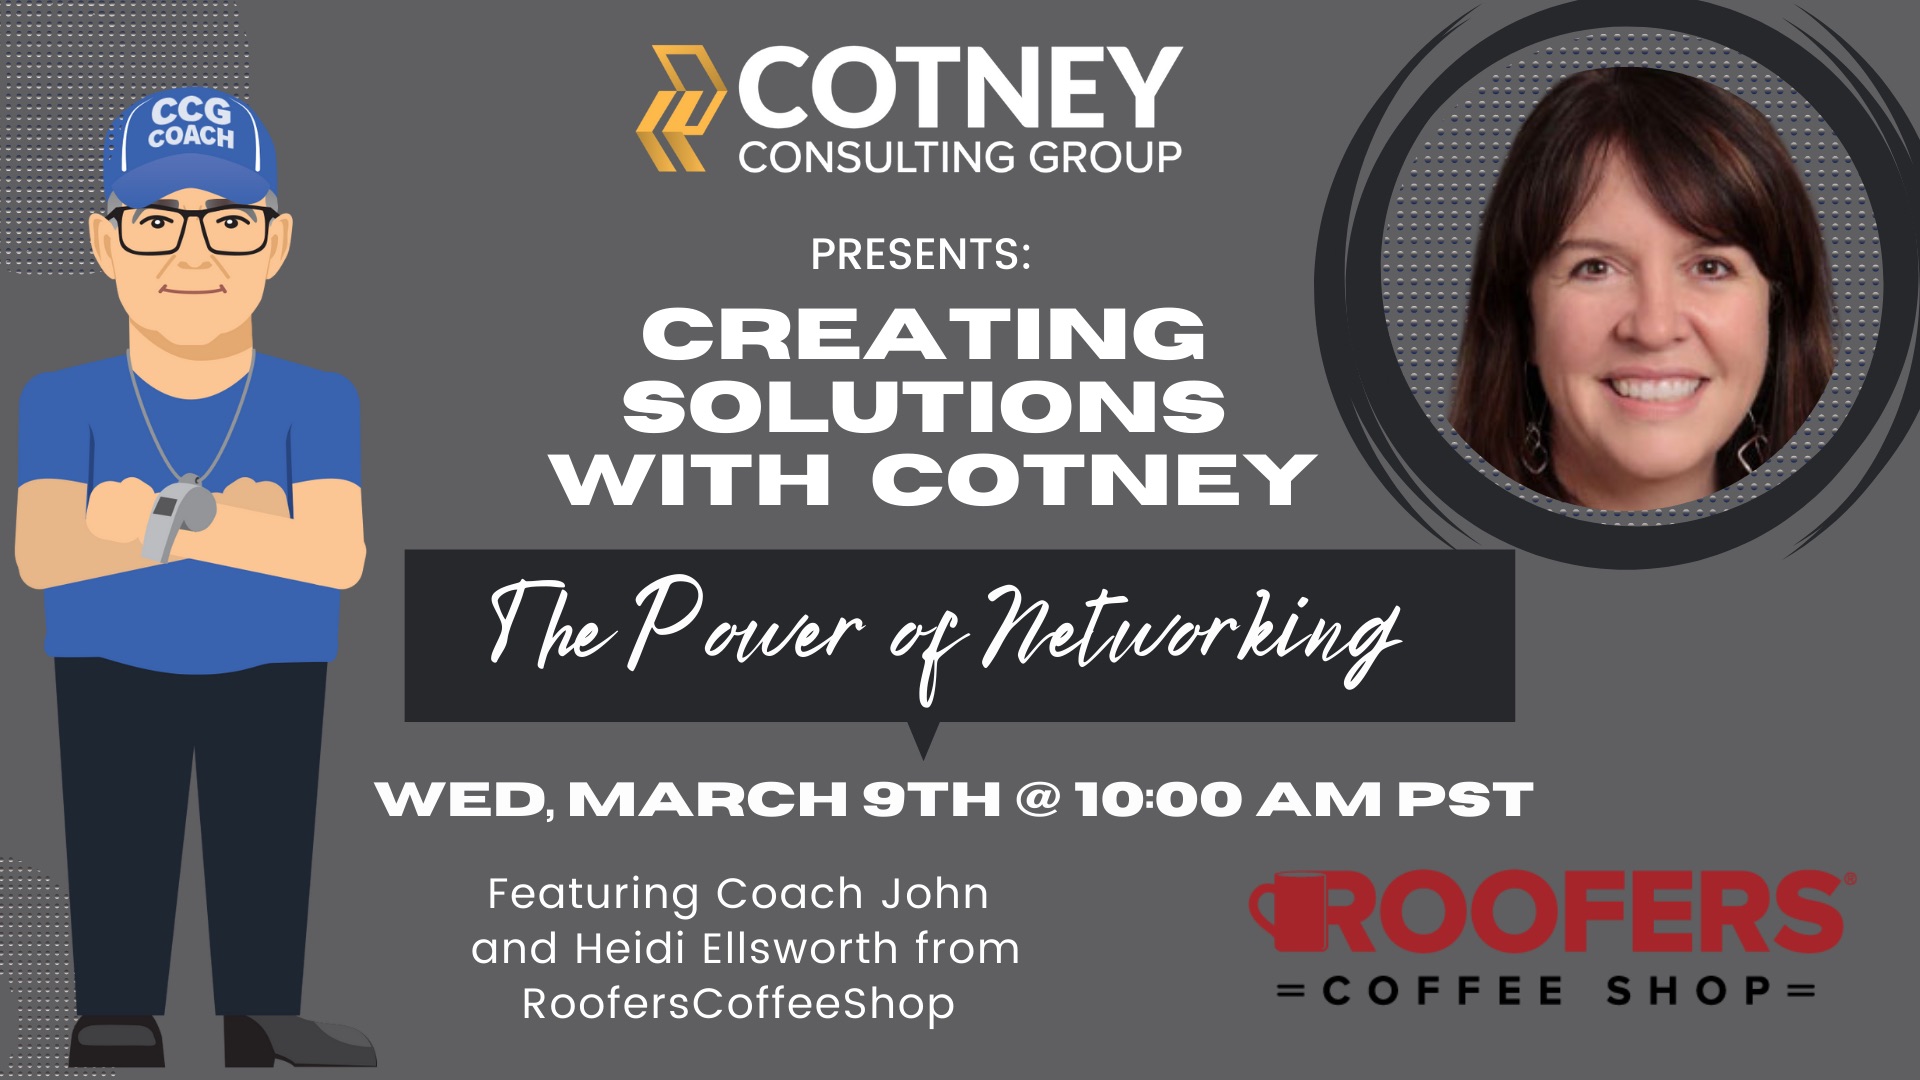 Cotney - the power of networking